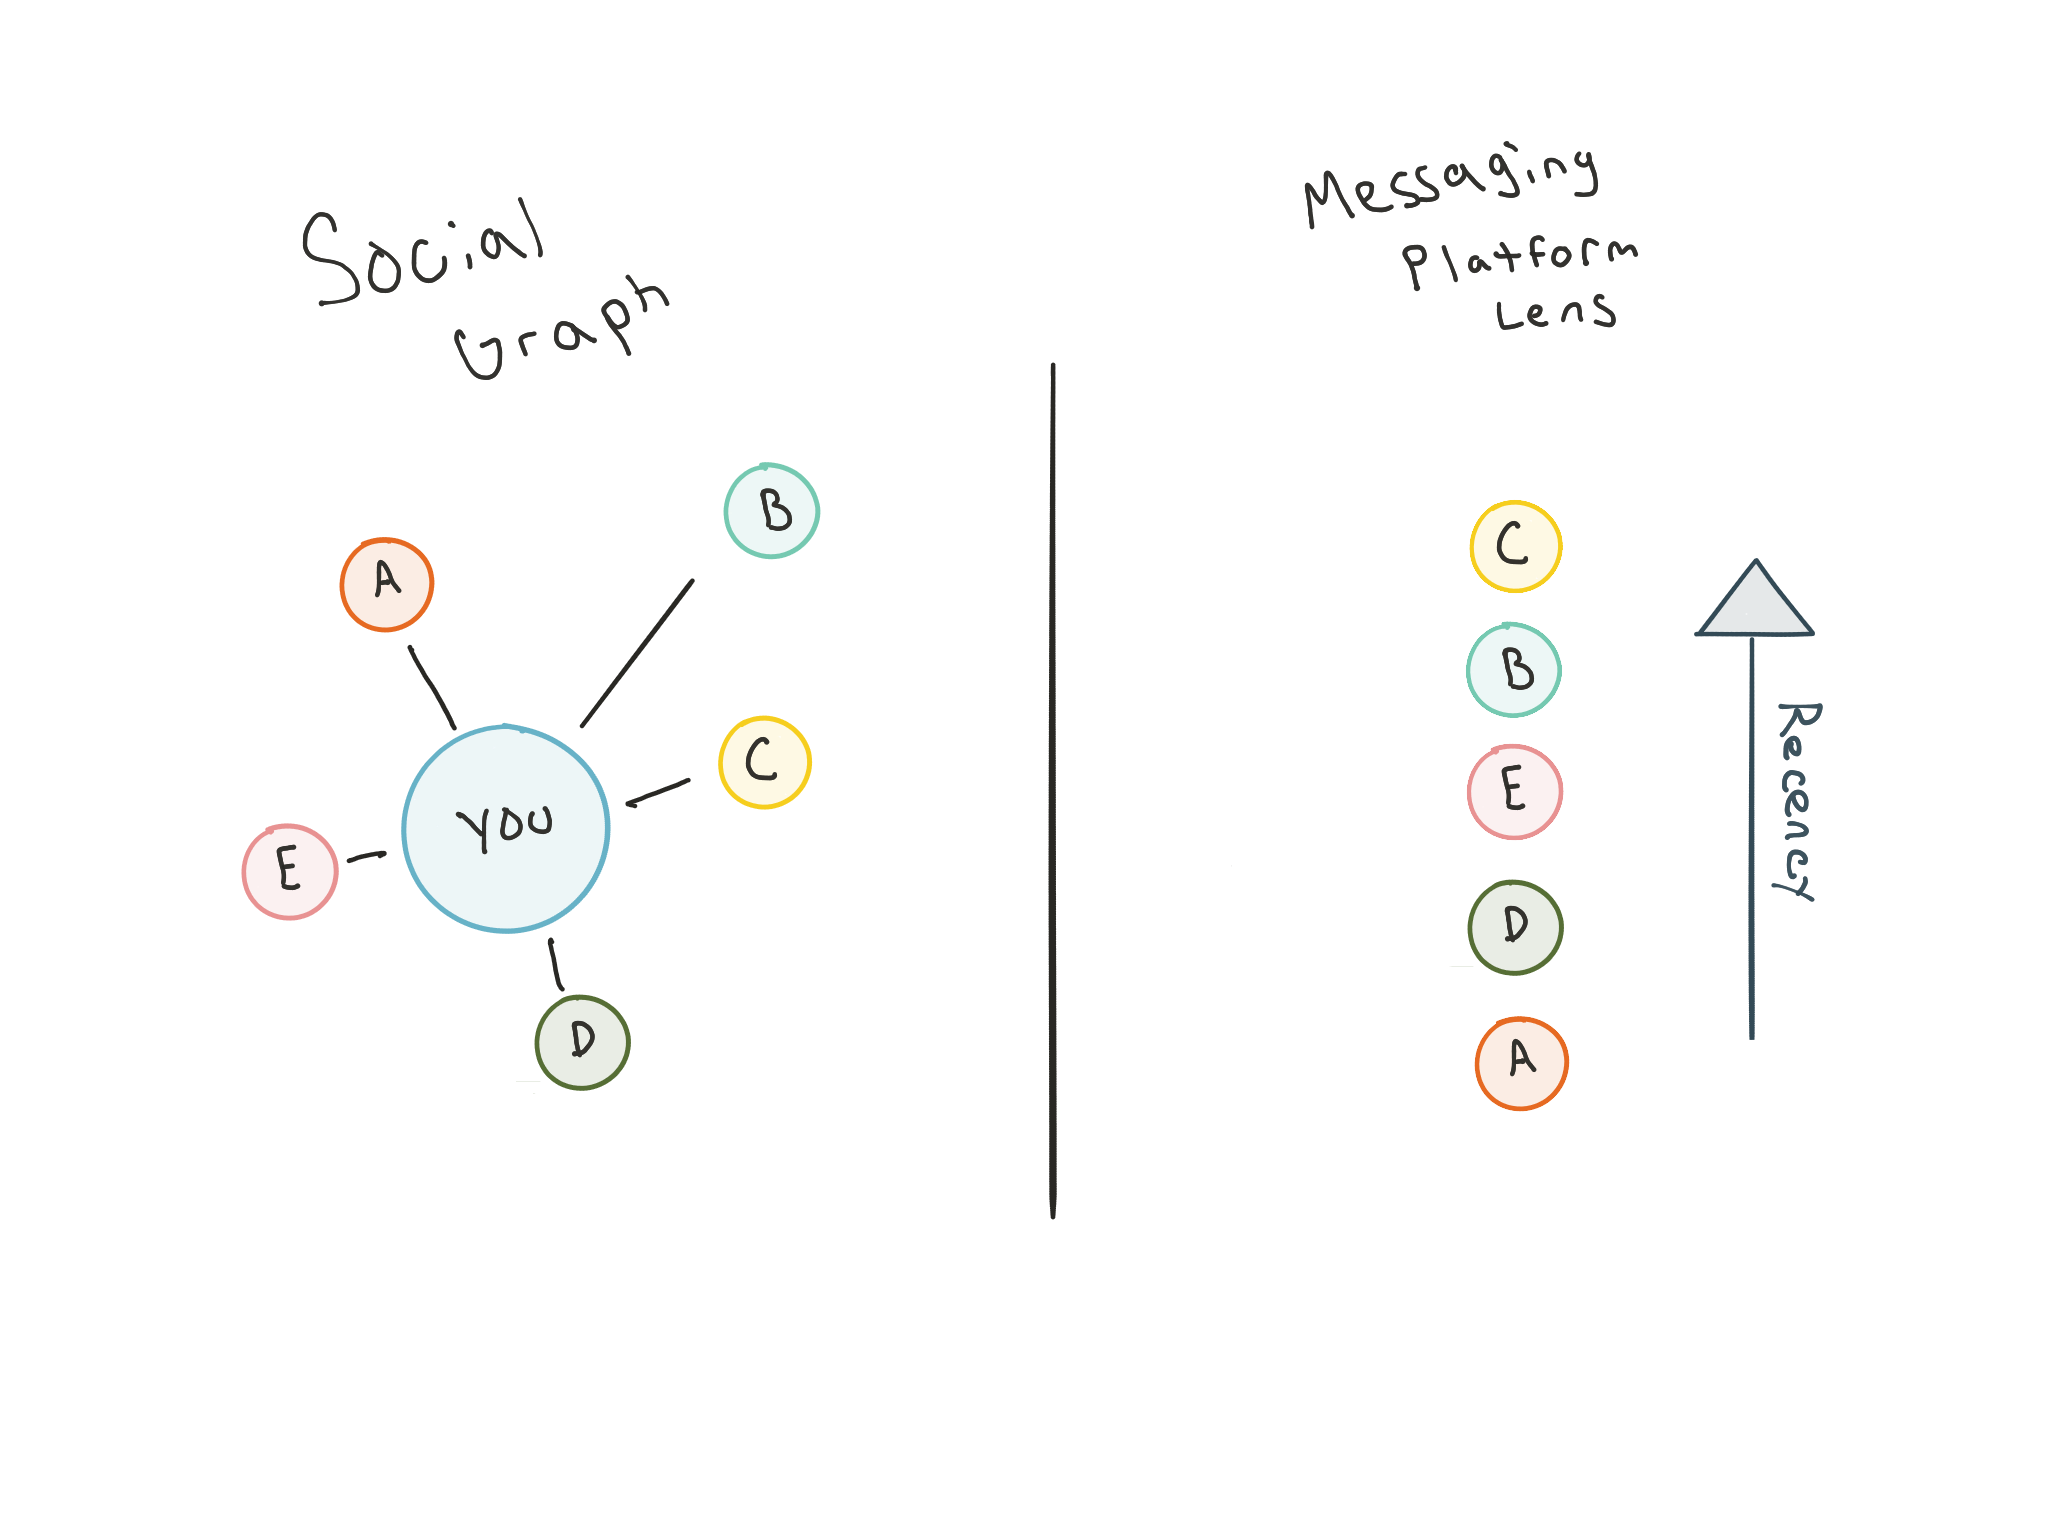 Illustration of messaging platforms shuffling the social graph by recency